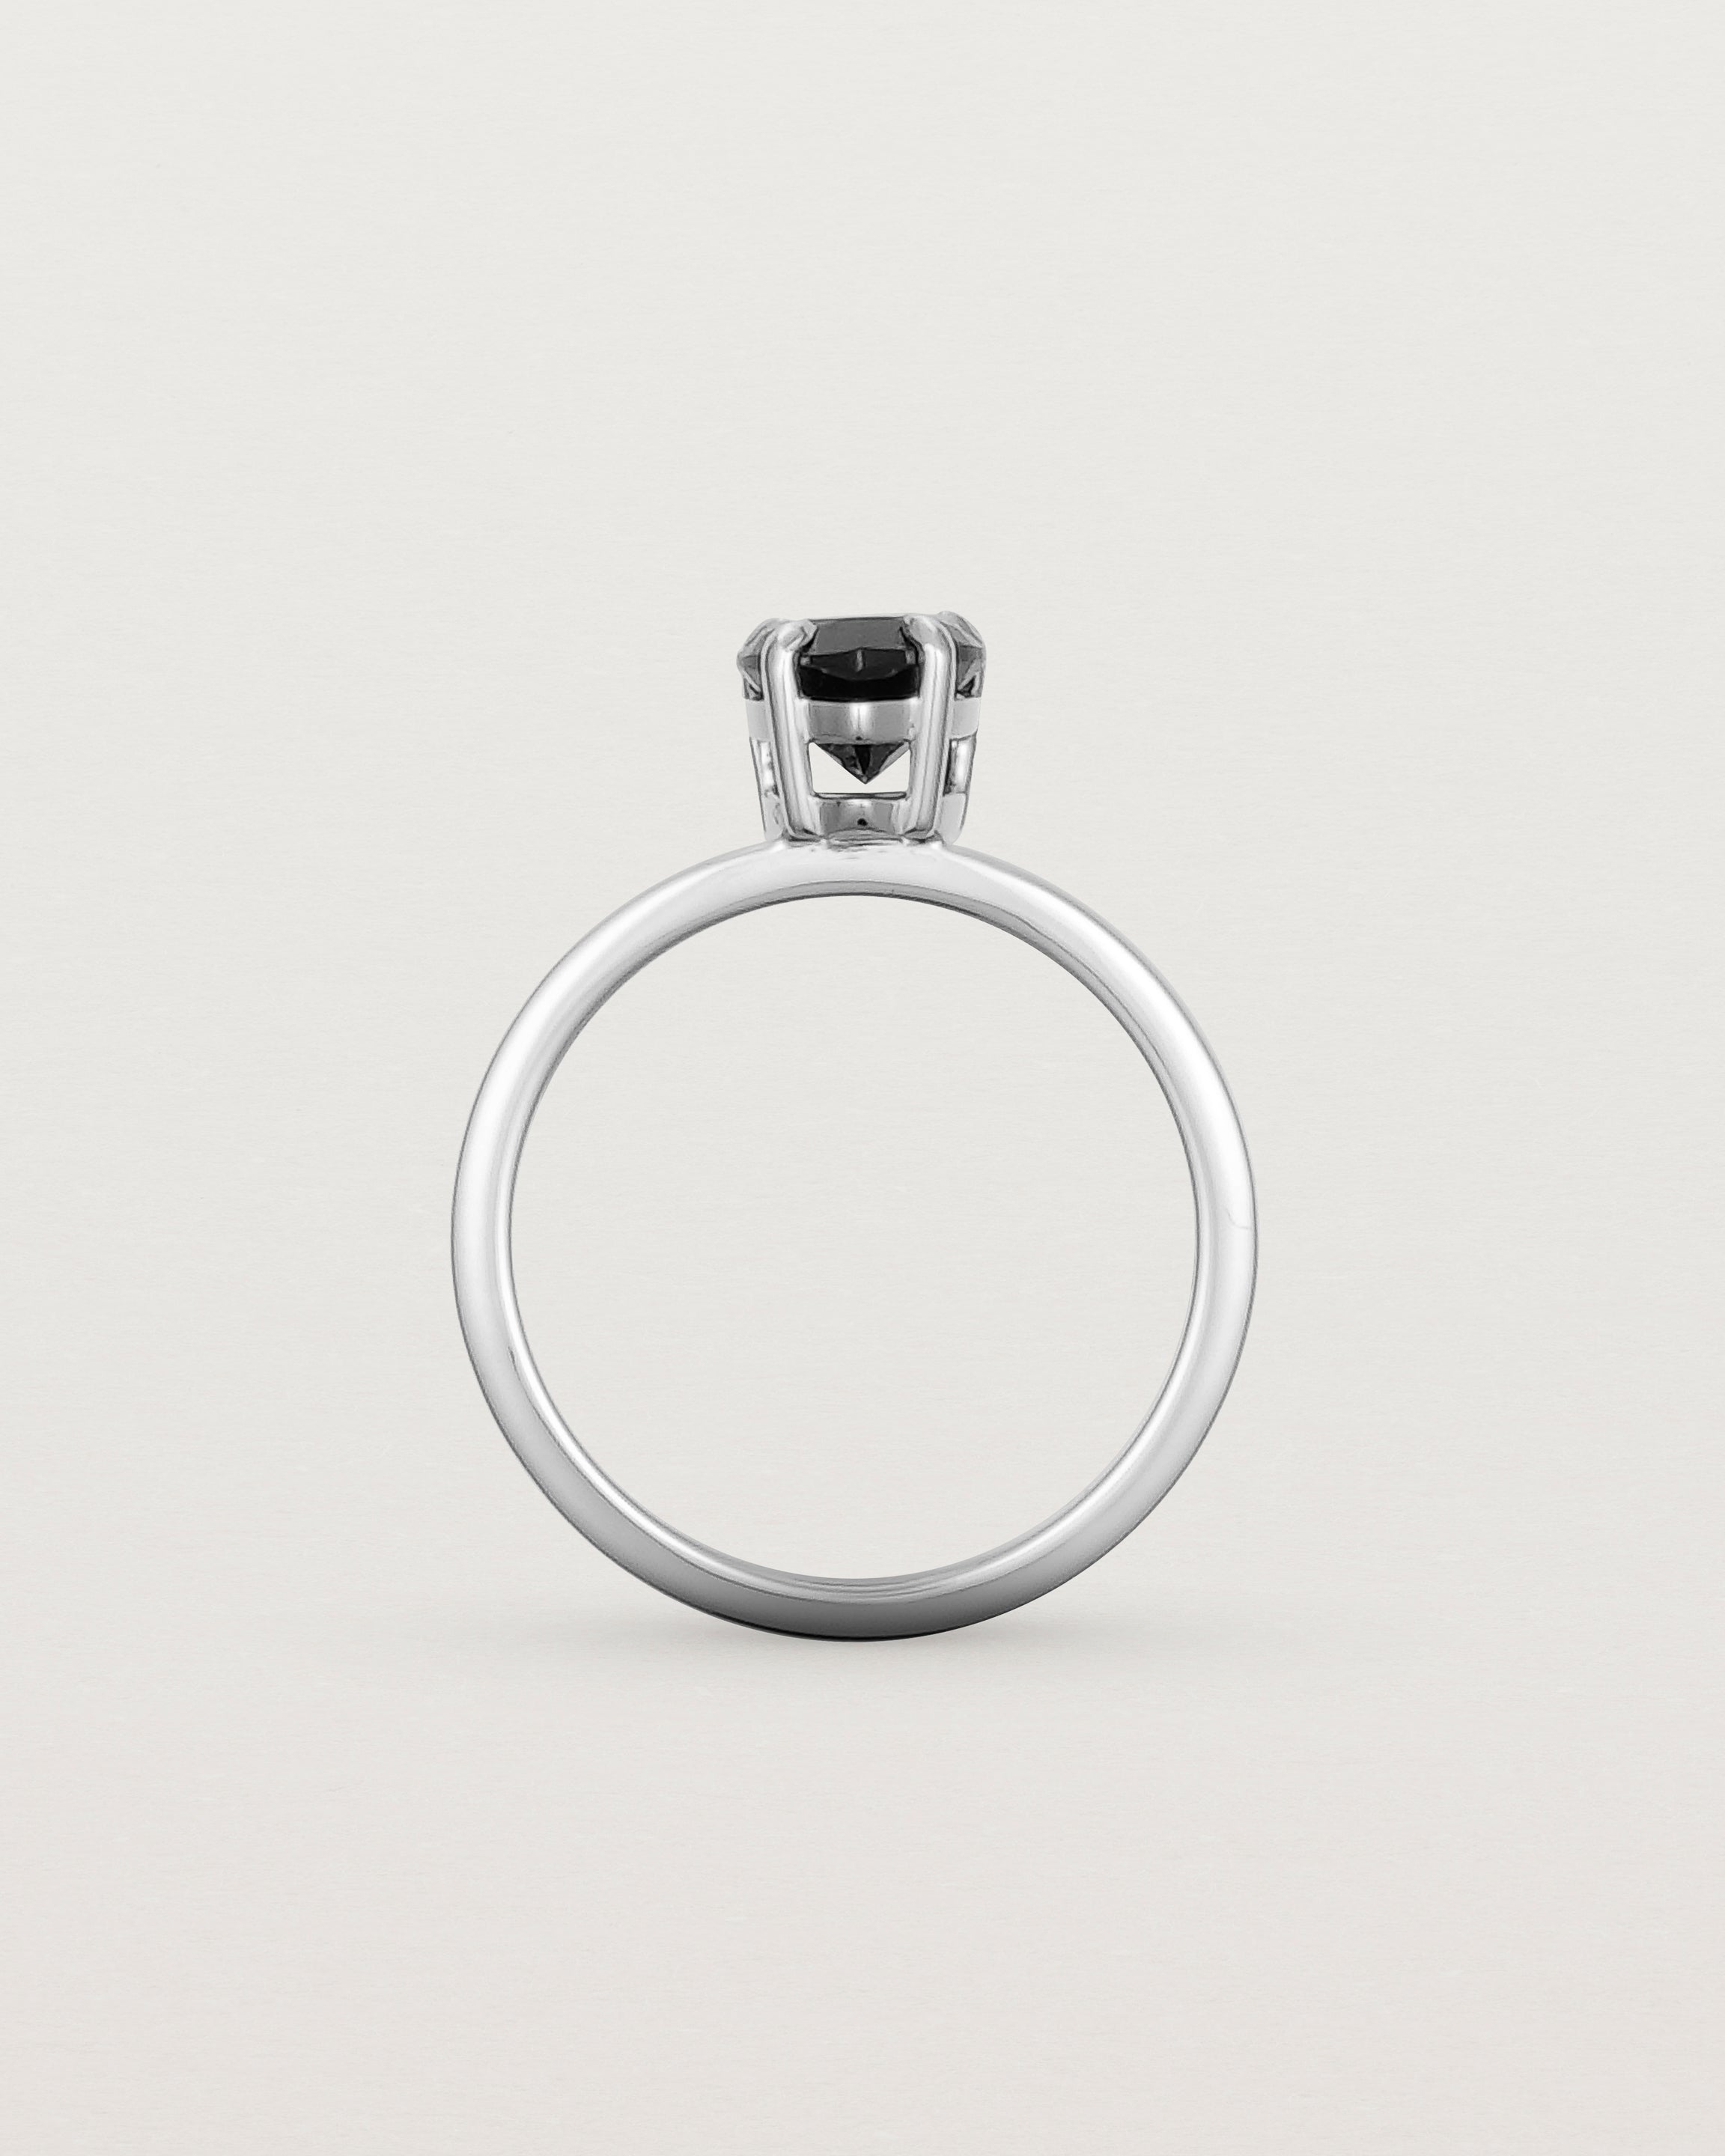 Standing view of the Una Pear Solitaire | Black Spinel | Rose Gold.